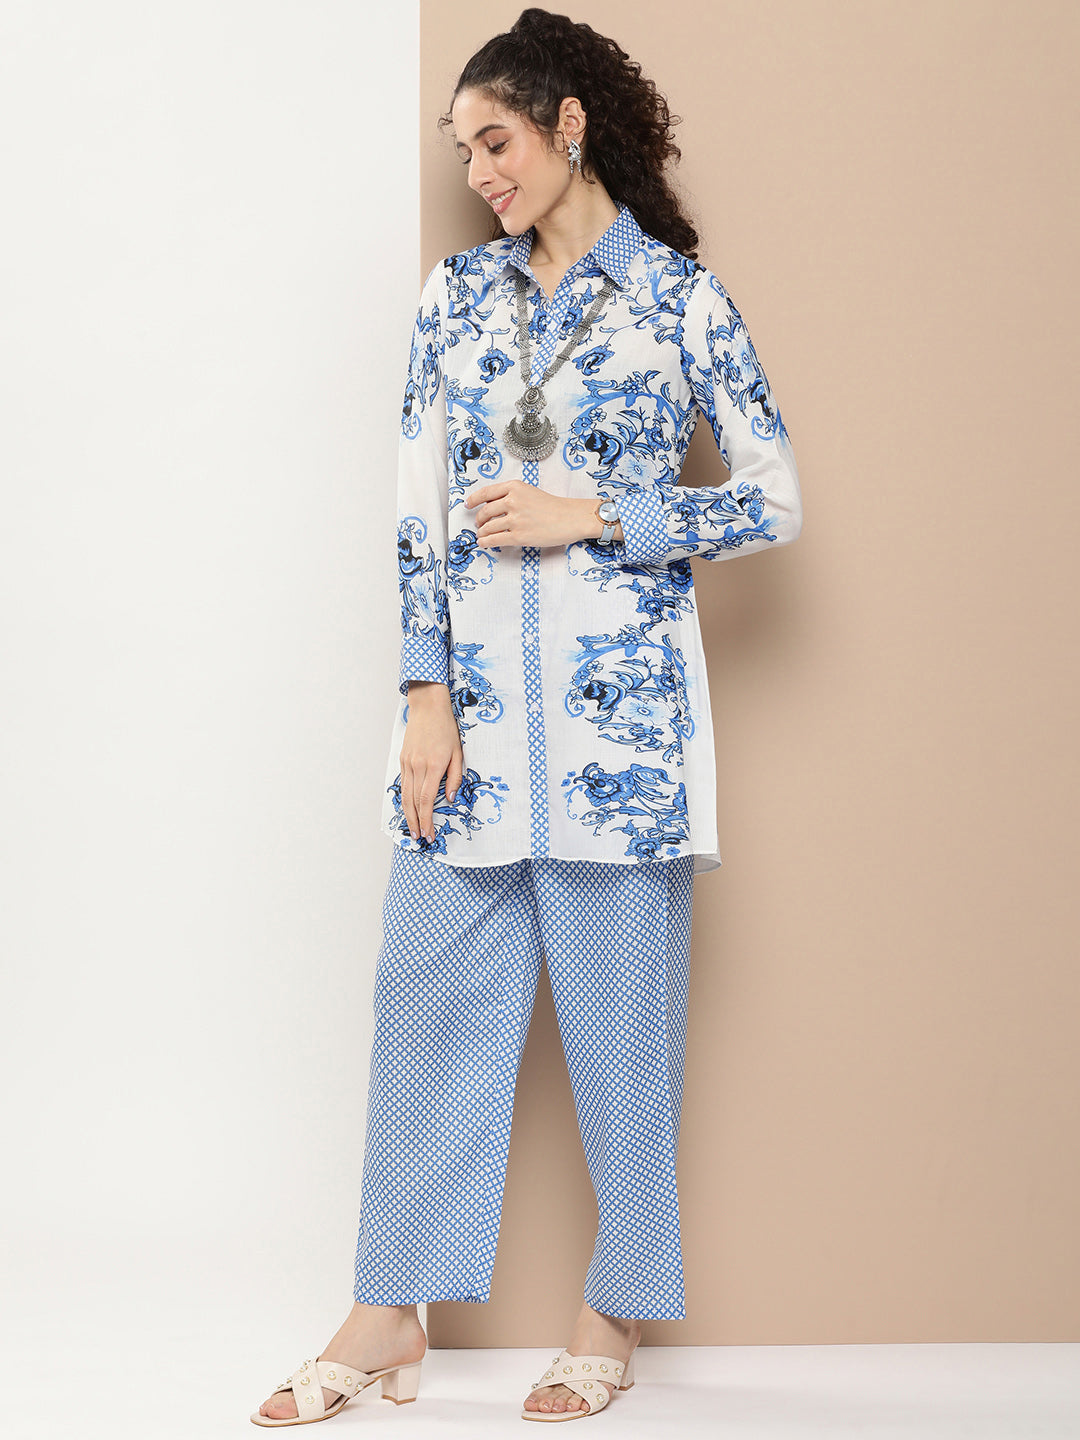 Women's Off White And Blue Floral Print Kurta With Printed Pants - Bhama Couture